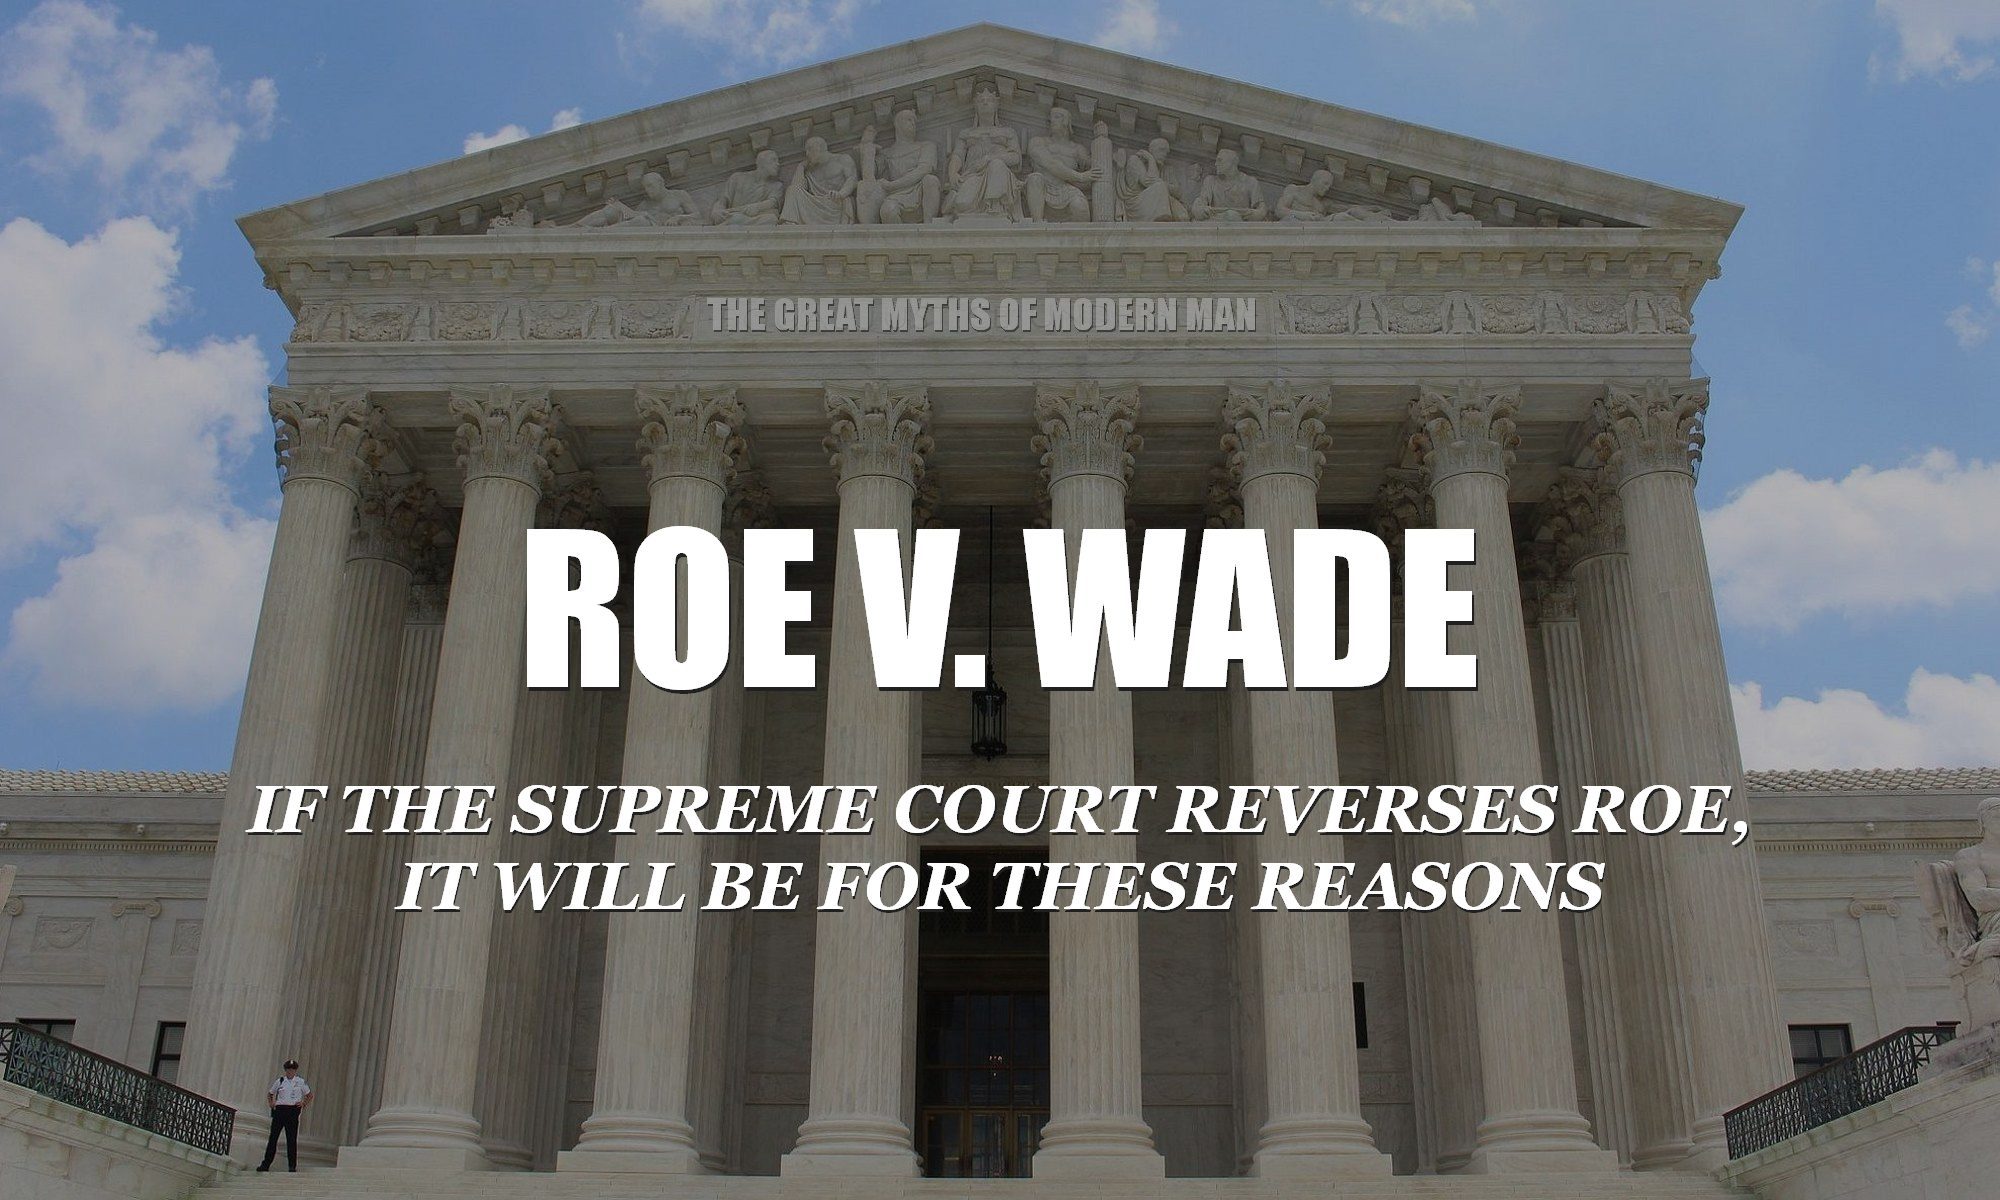 will-roe-be-overturned-why-when-is-supreme-court-overturning-roe-v-wade